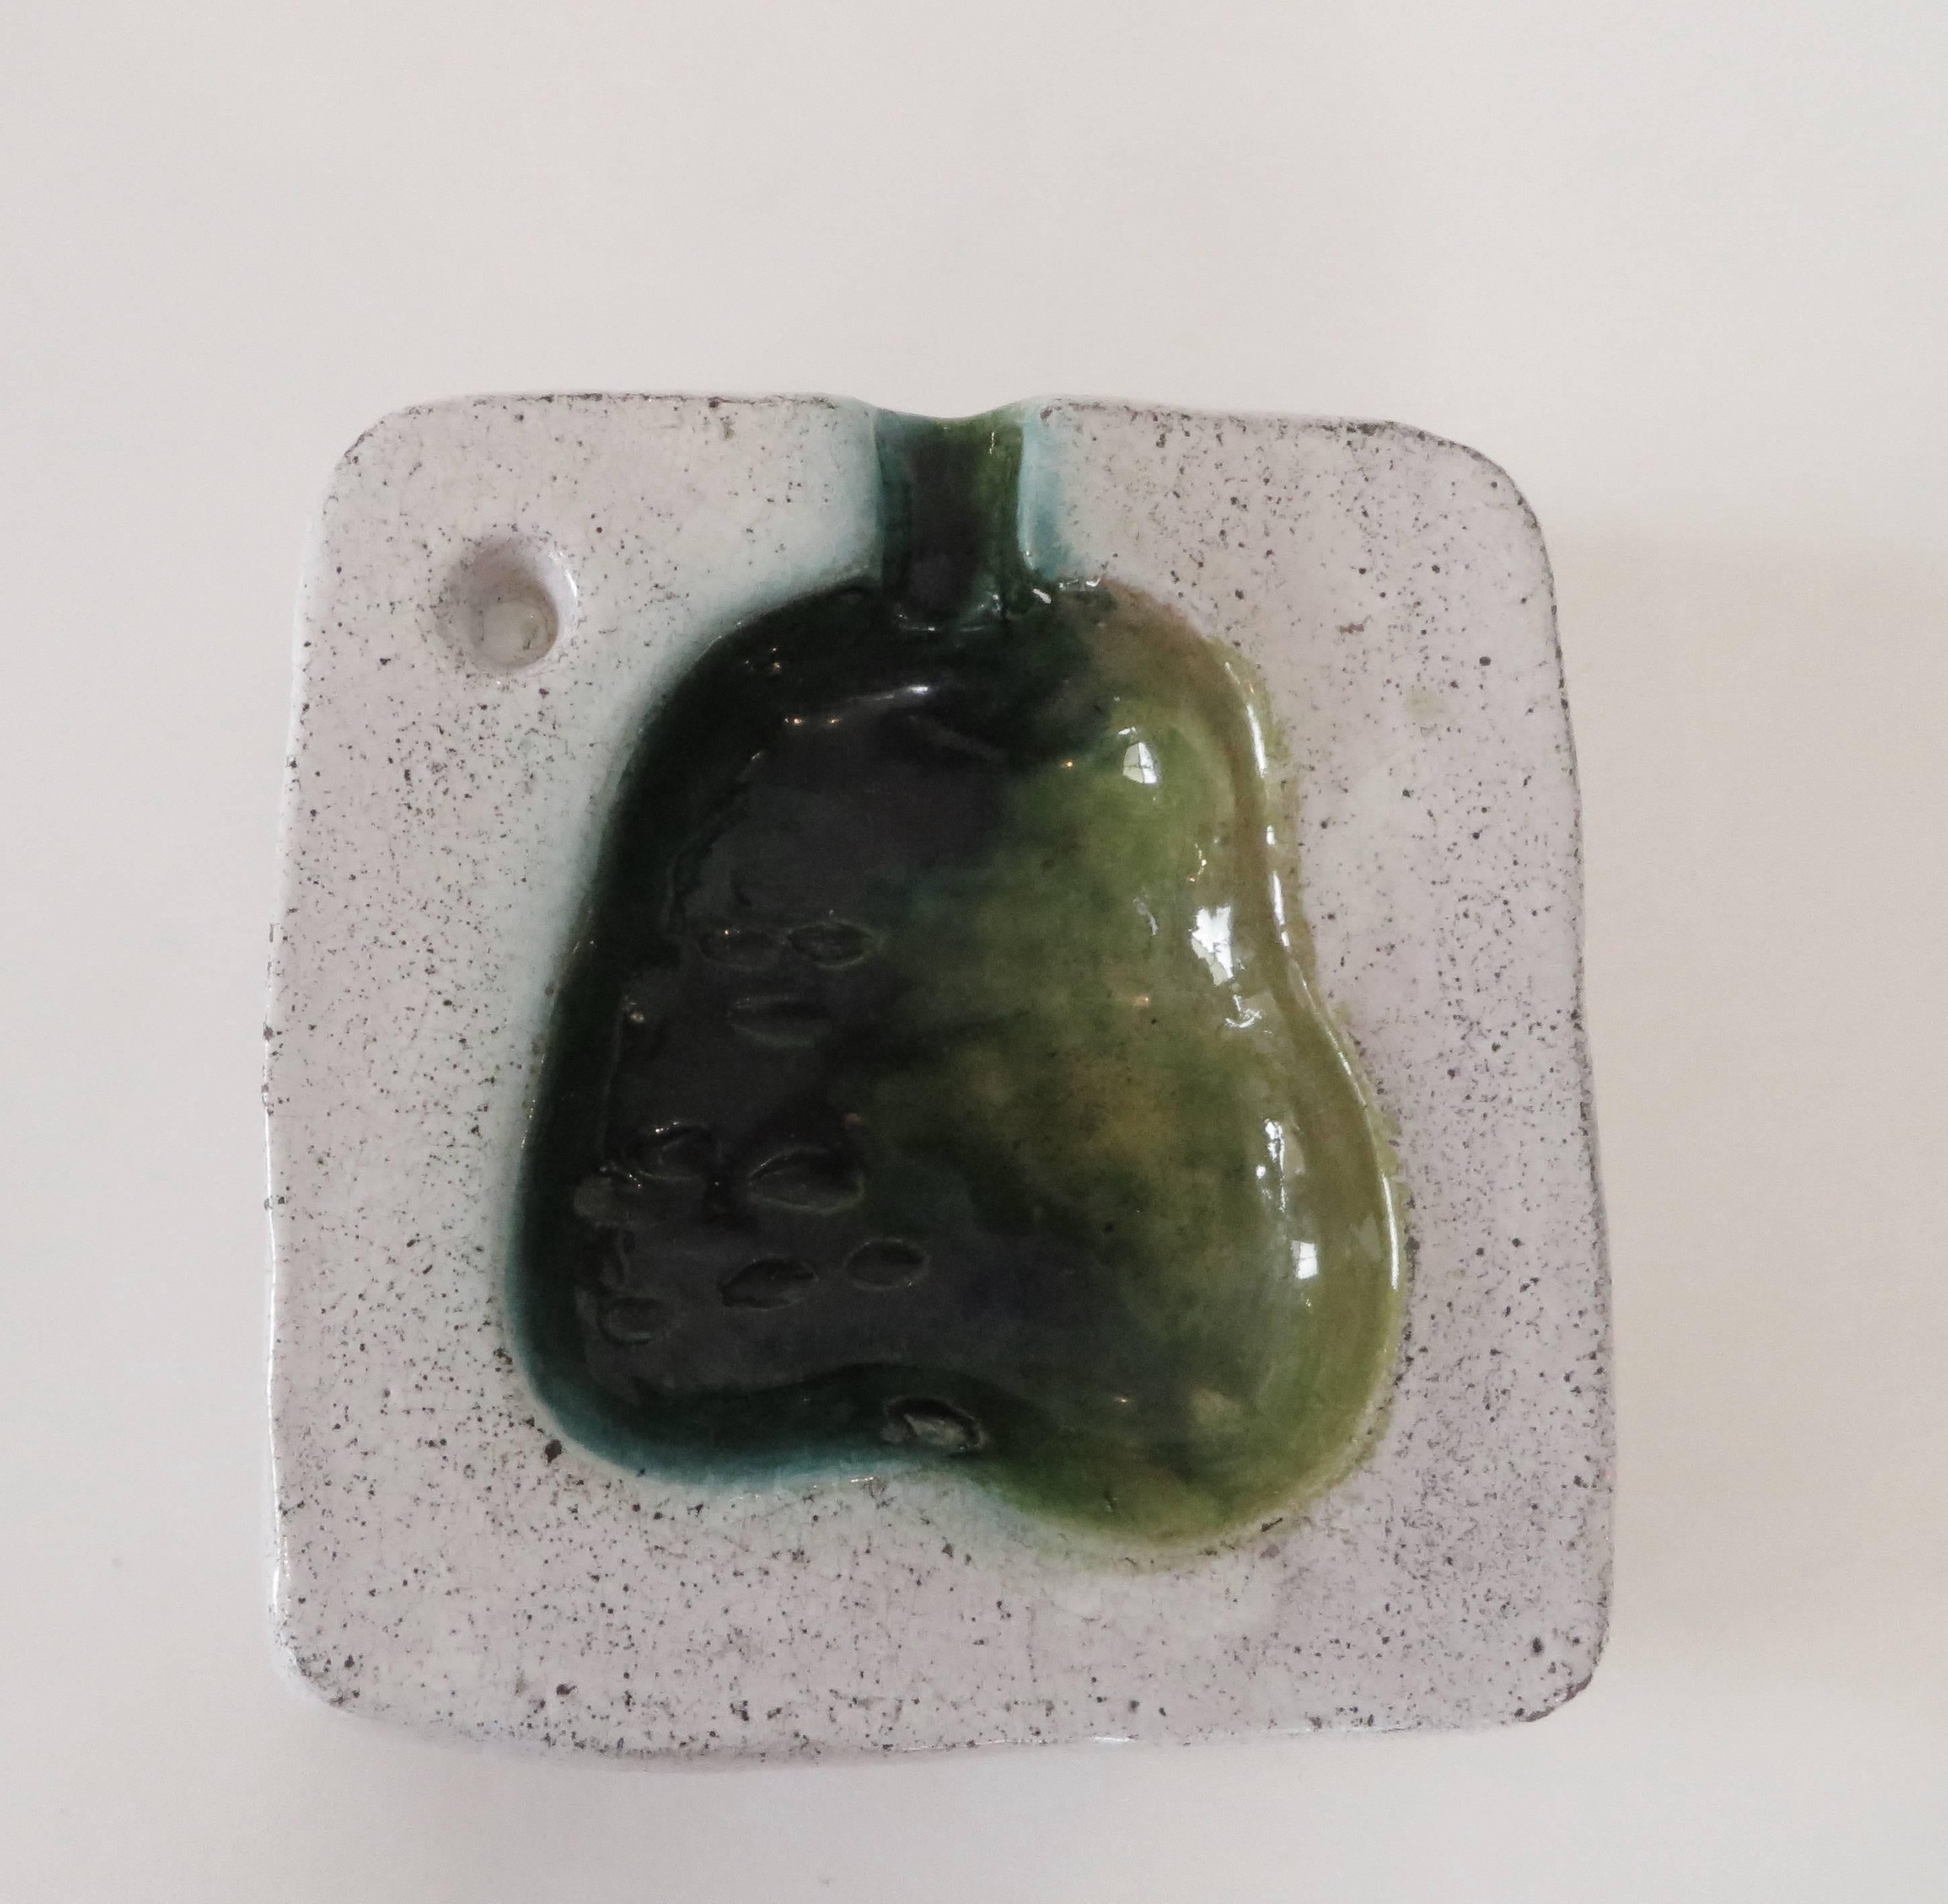 Mid-Century Modern French Artist Georges Jouve Ceramic Cendrier or Vide Poche Pear